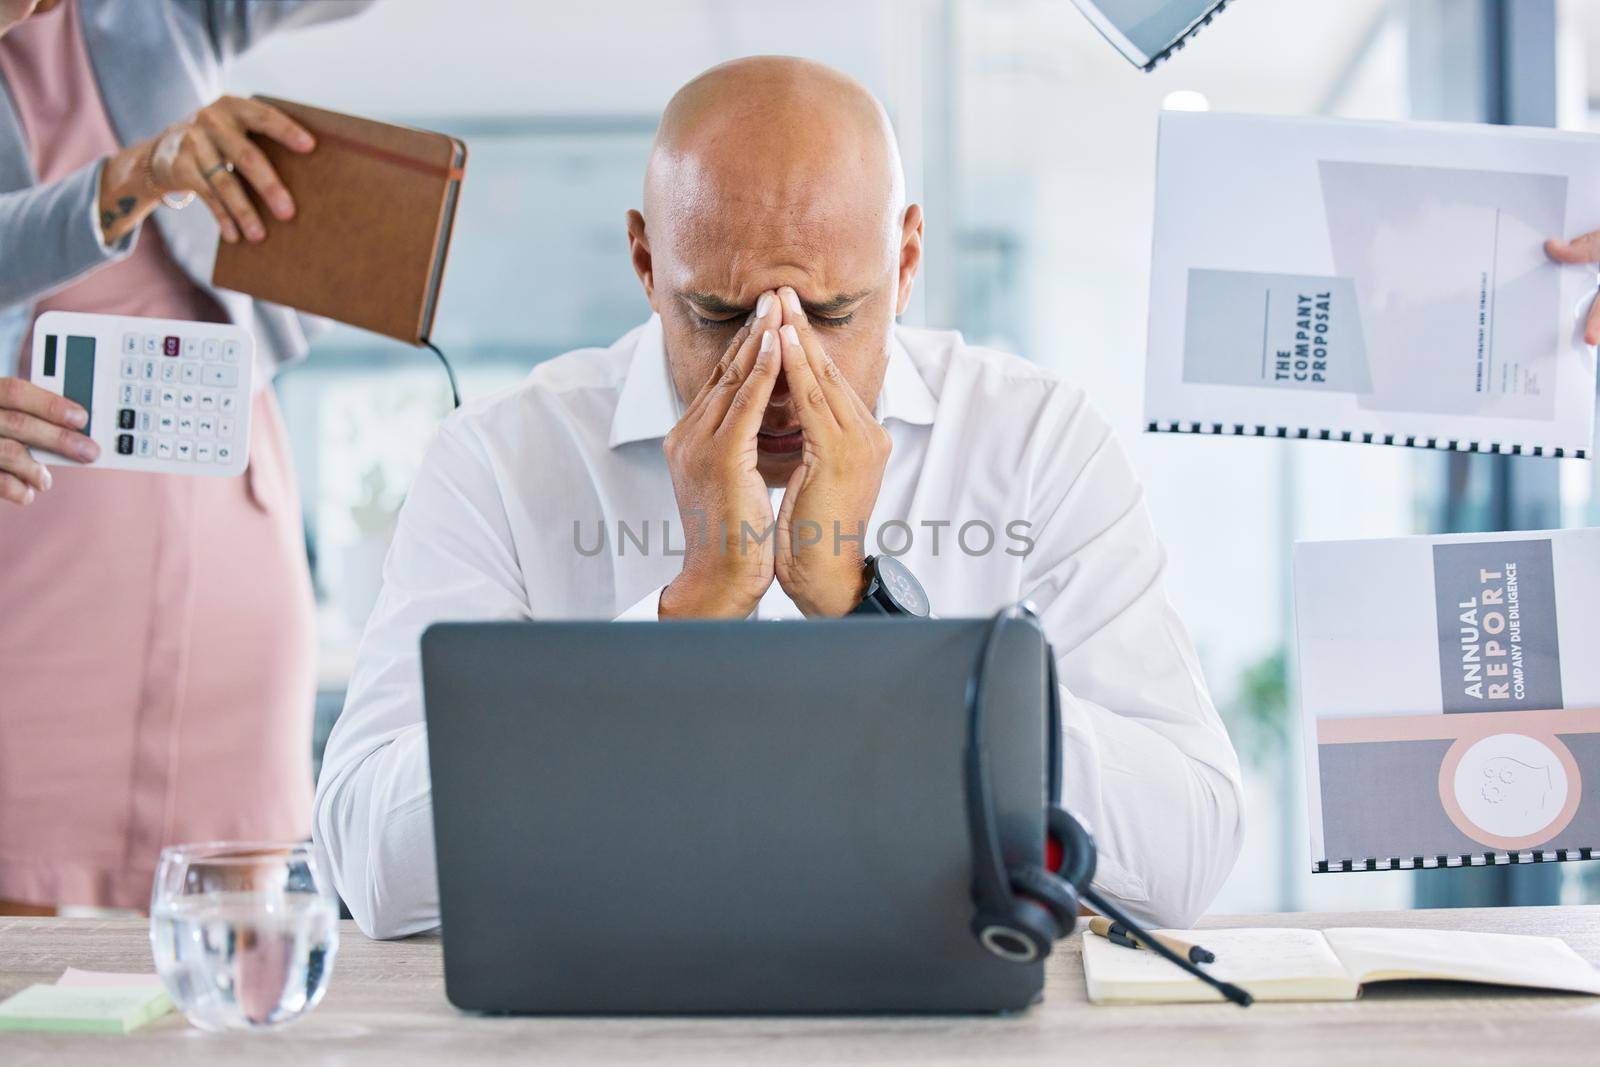 Stress, deadline and mental burnout with anxious, worried and frustrated business man in office. Overworked, annoyed and tired worker with headache, pressure and trouble for demands in busy workplace.